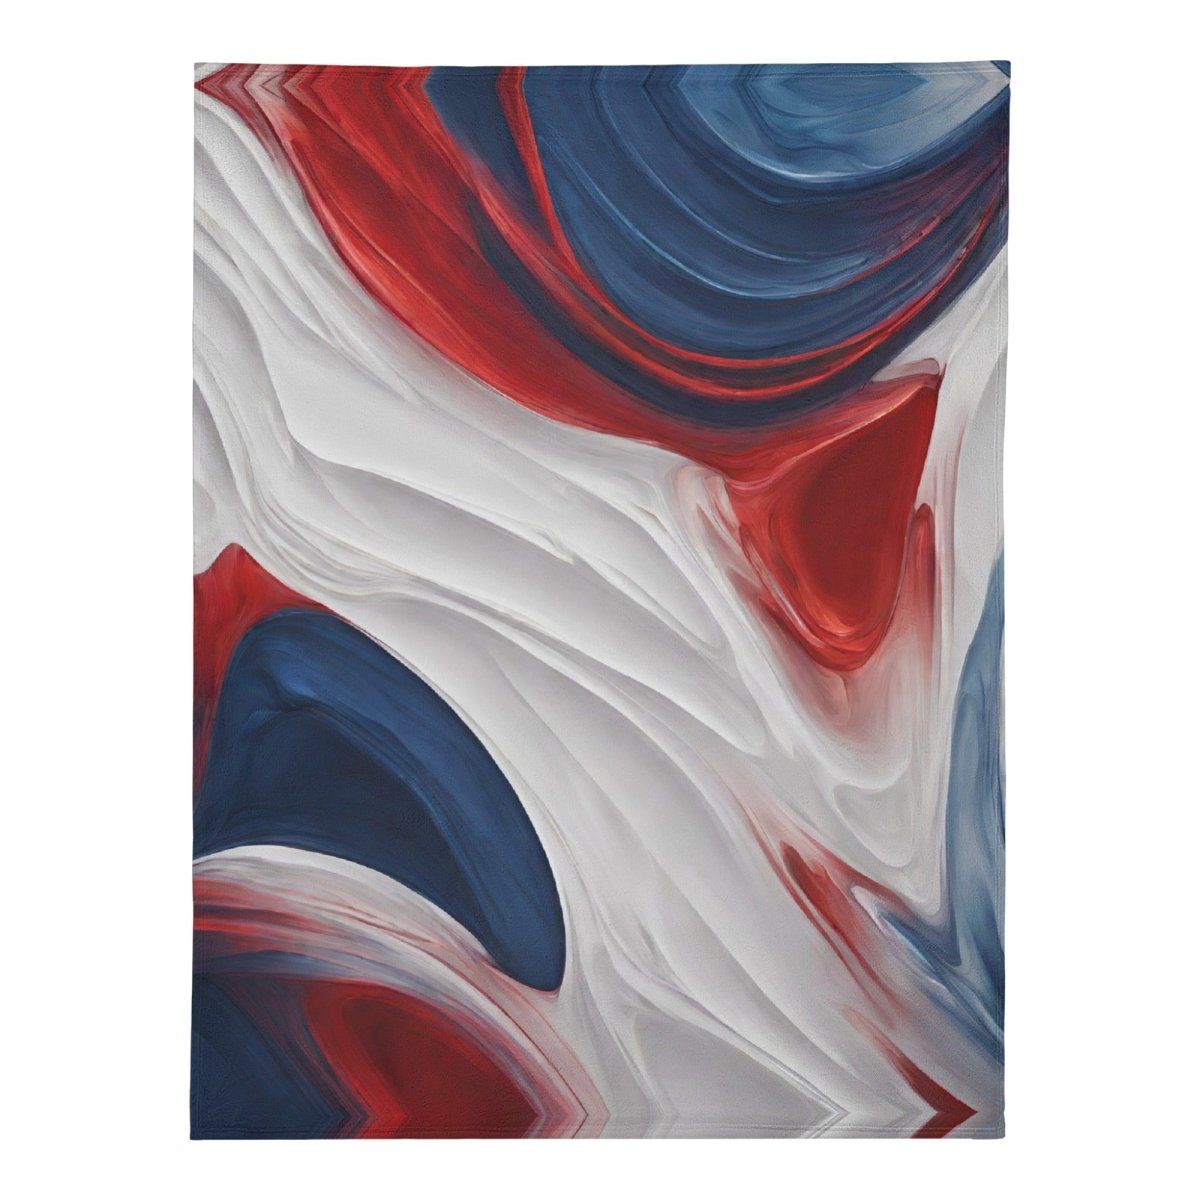 Premium Red White and Blue Fleece Blanket - Soft Polyester for Ultimate Comfort - Iron Phoenix GHG